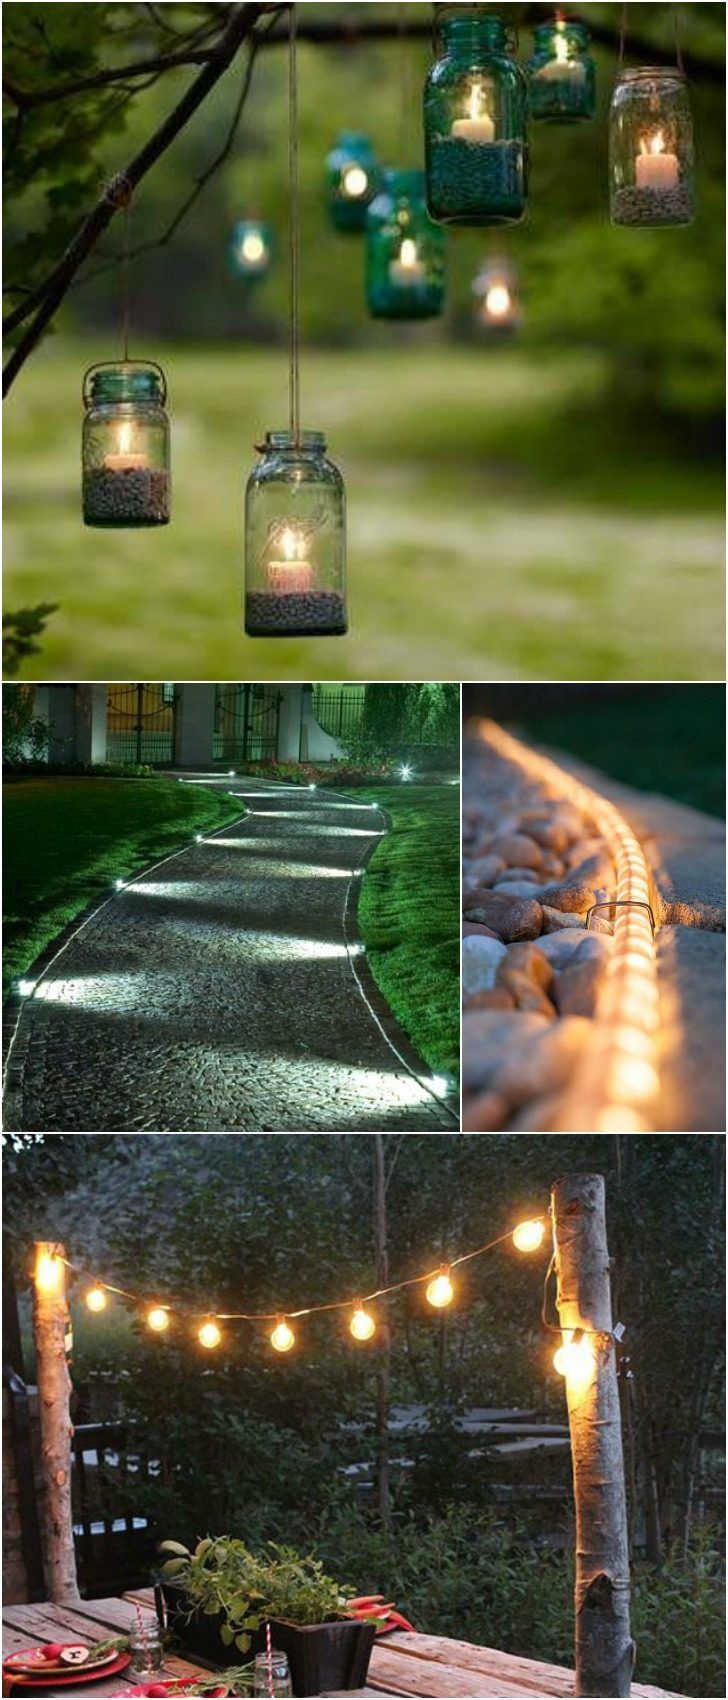 10 Outdoor Lighting Ideas – the middle two would be good for our long driveway